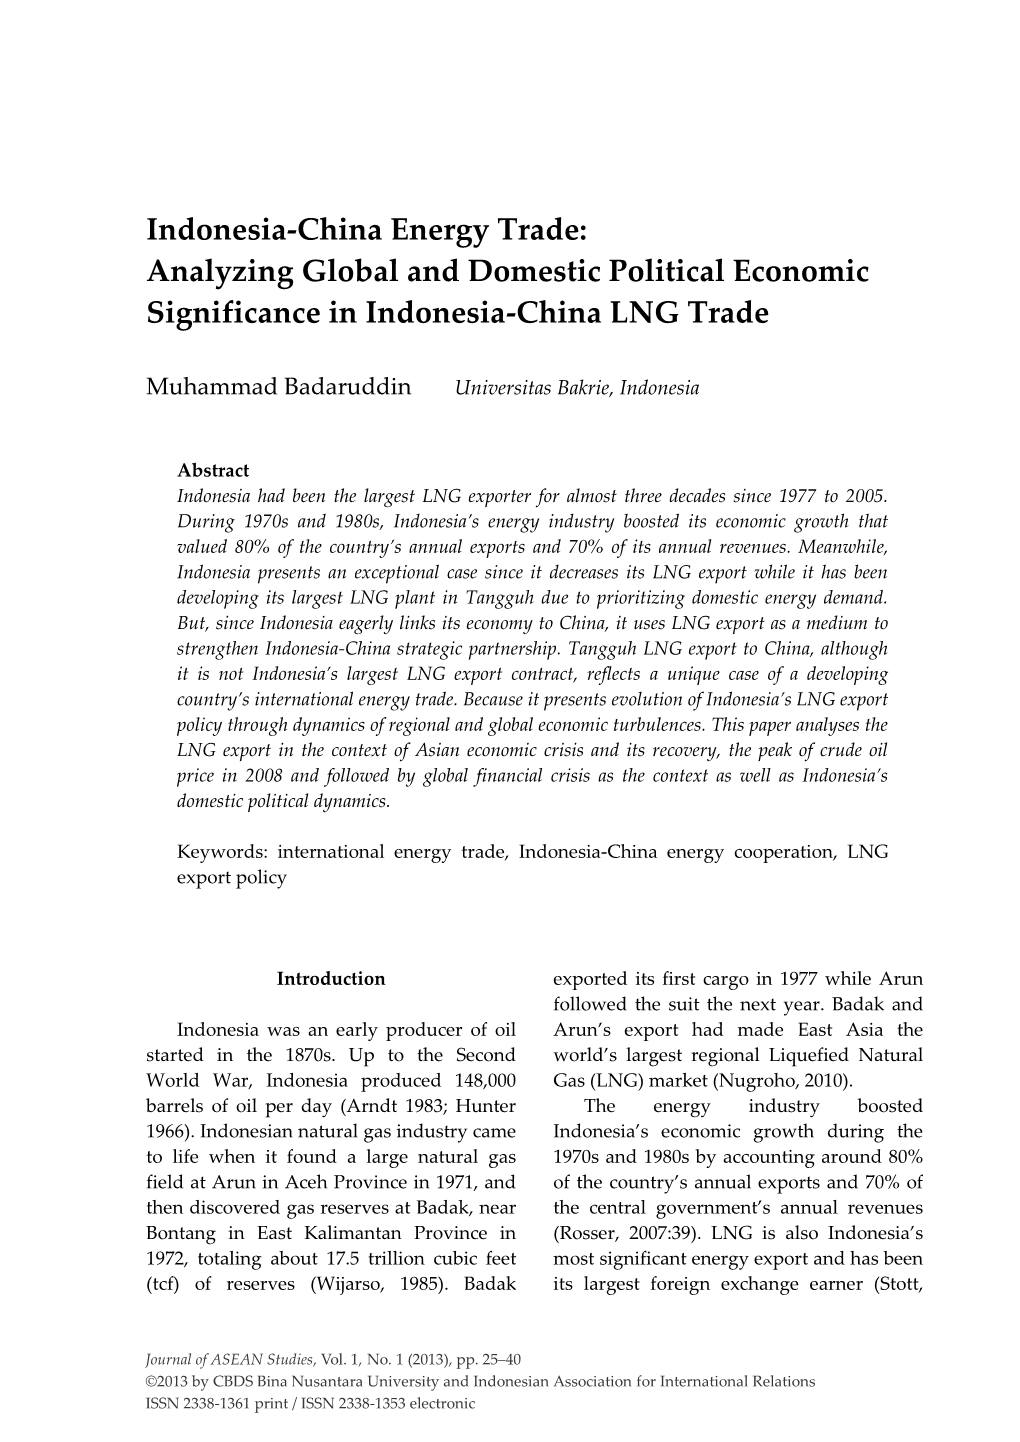 Indonesia-China Energy Trade: Analyzing Global and Domestic Political Economic Significance in Indonesia-China LNG Trade